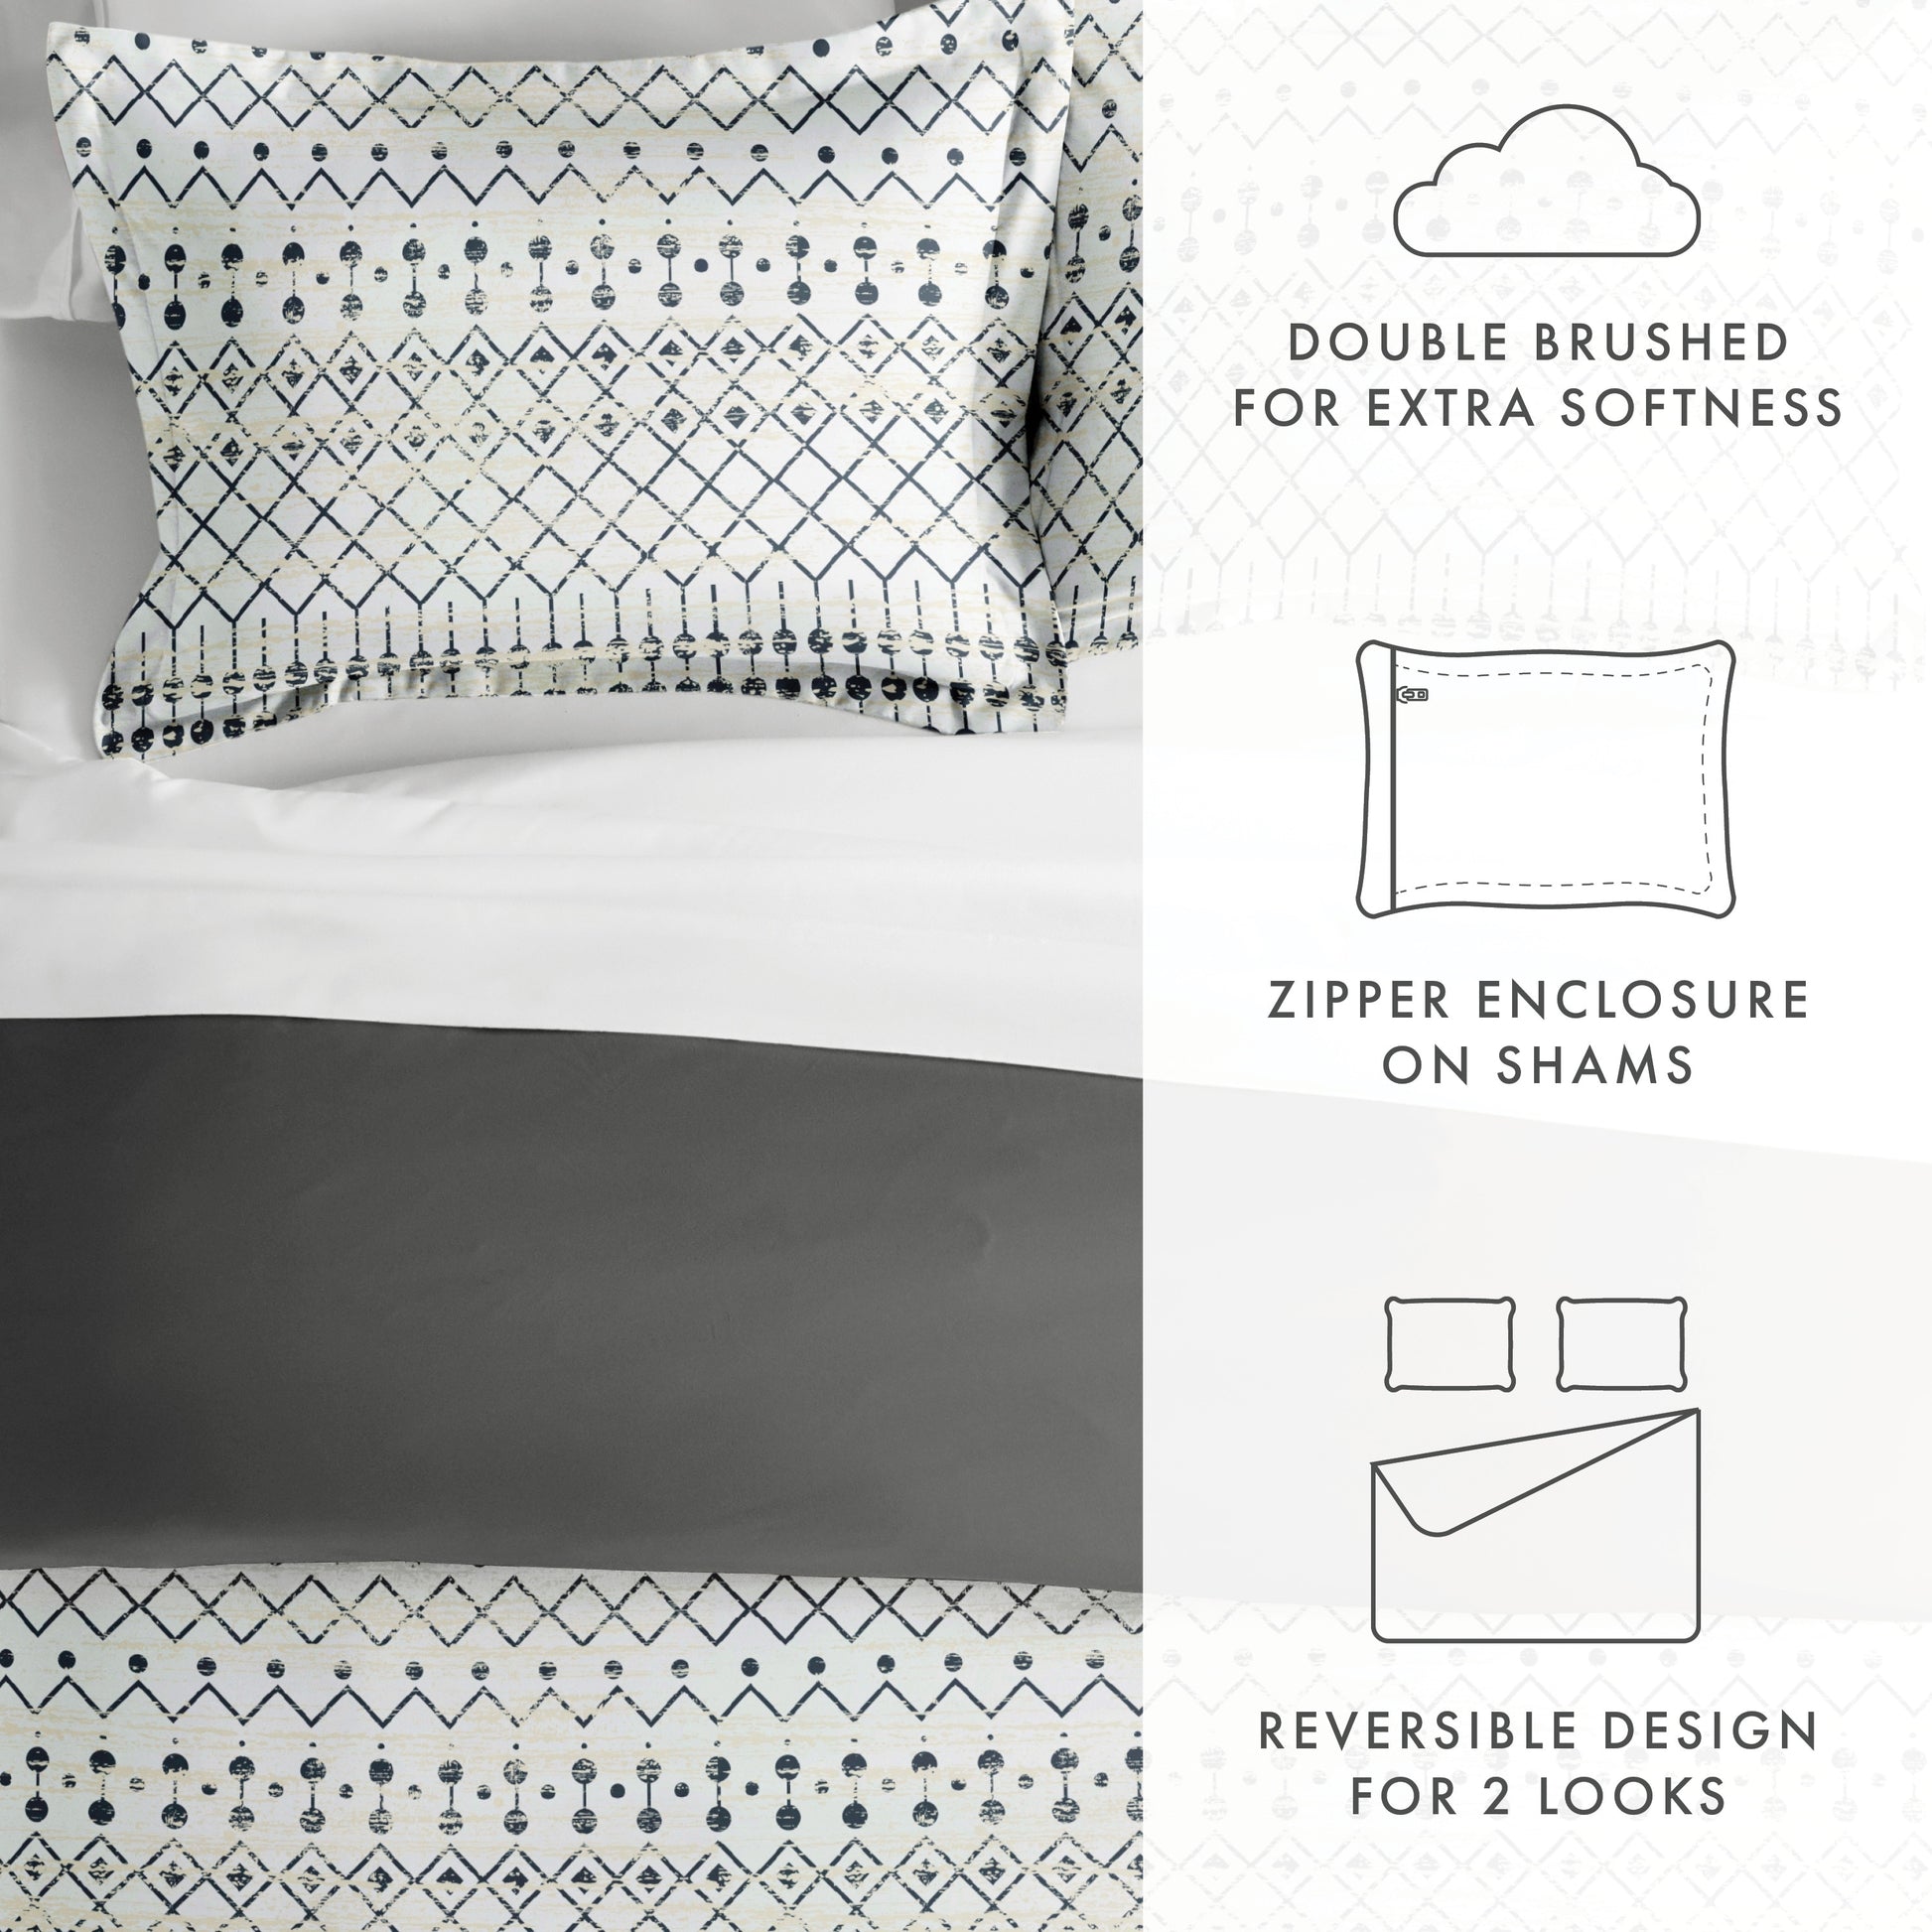 Etched Gate Oversized 3 Piece Reversible Duvet Cover Set